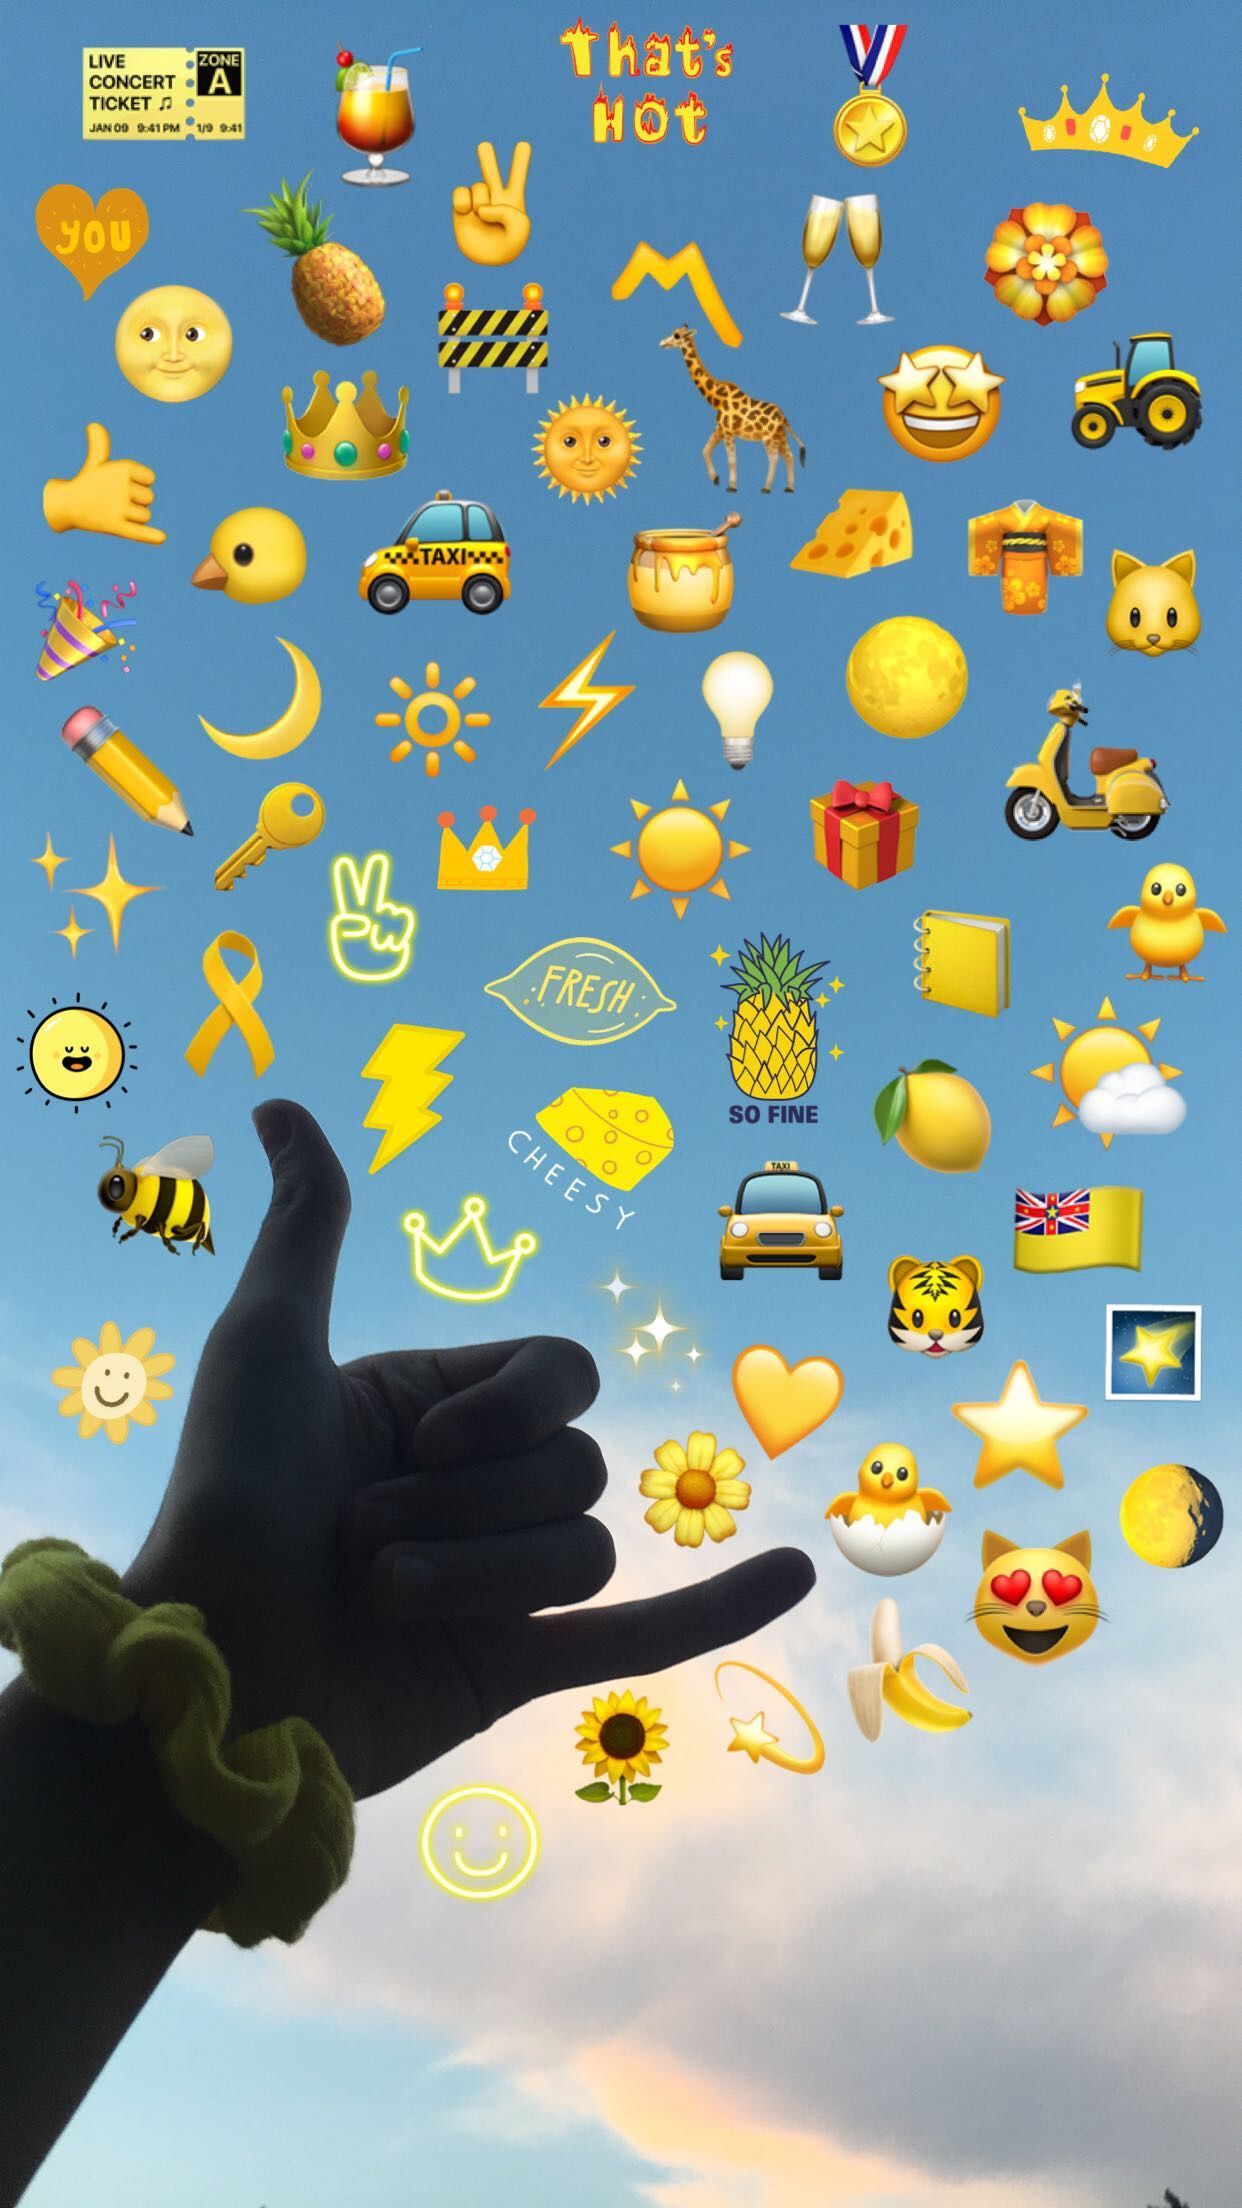 A hand with a glove on, reaching up to a sky filled with emojis. - Emoji